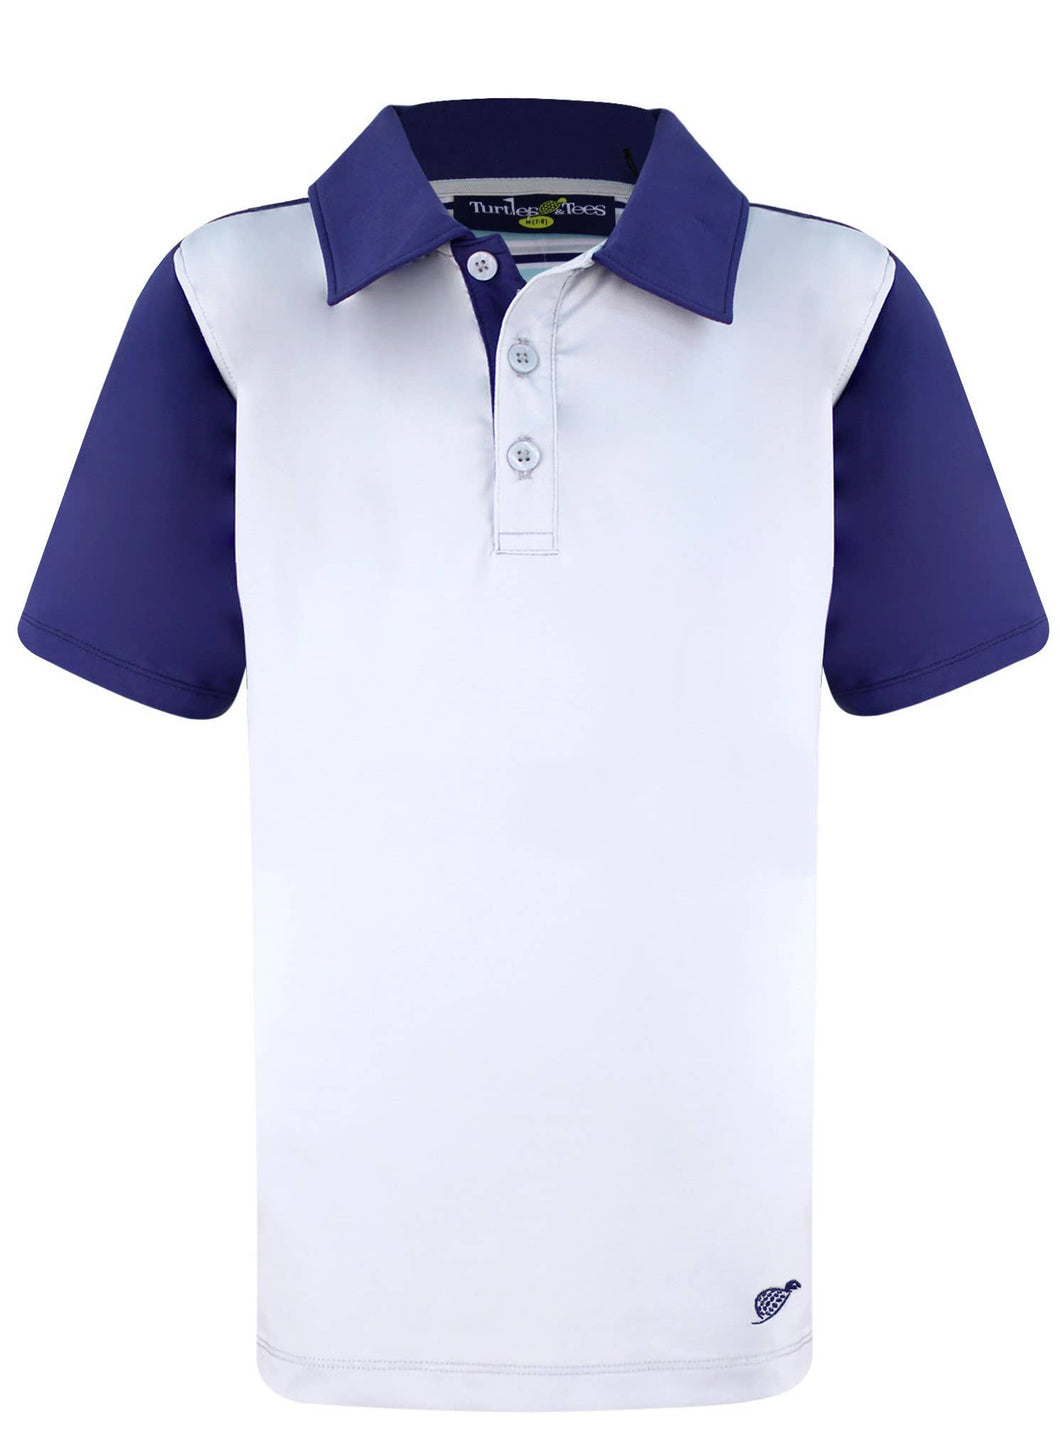 Boy's Performance Polo Shirt - Grey with Navy